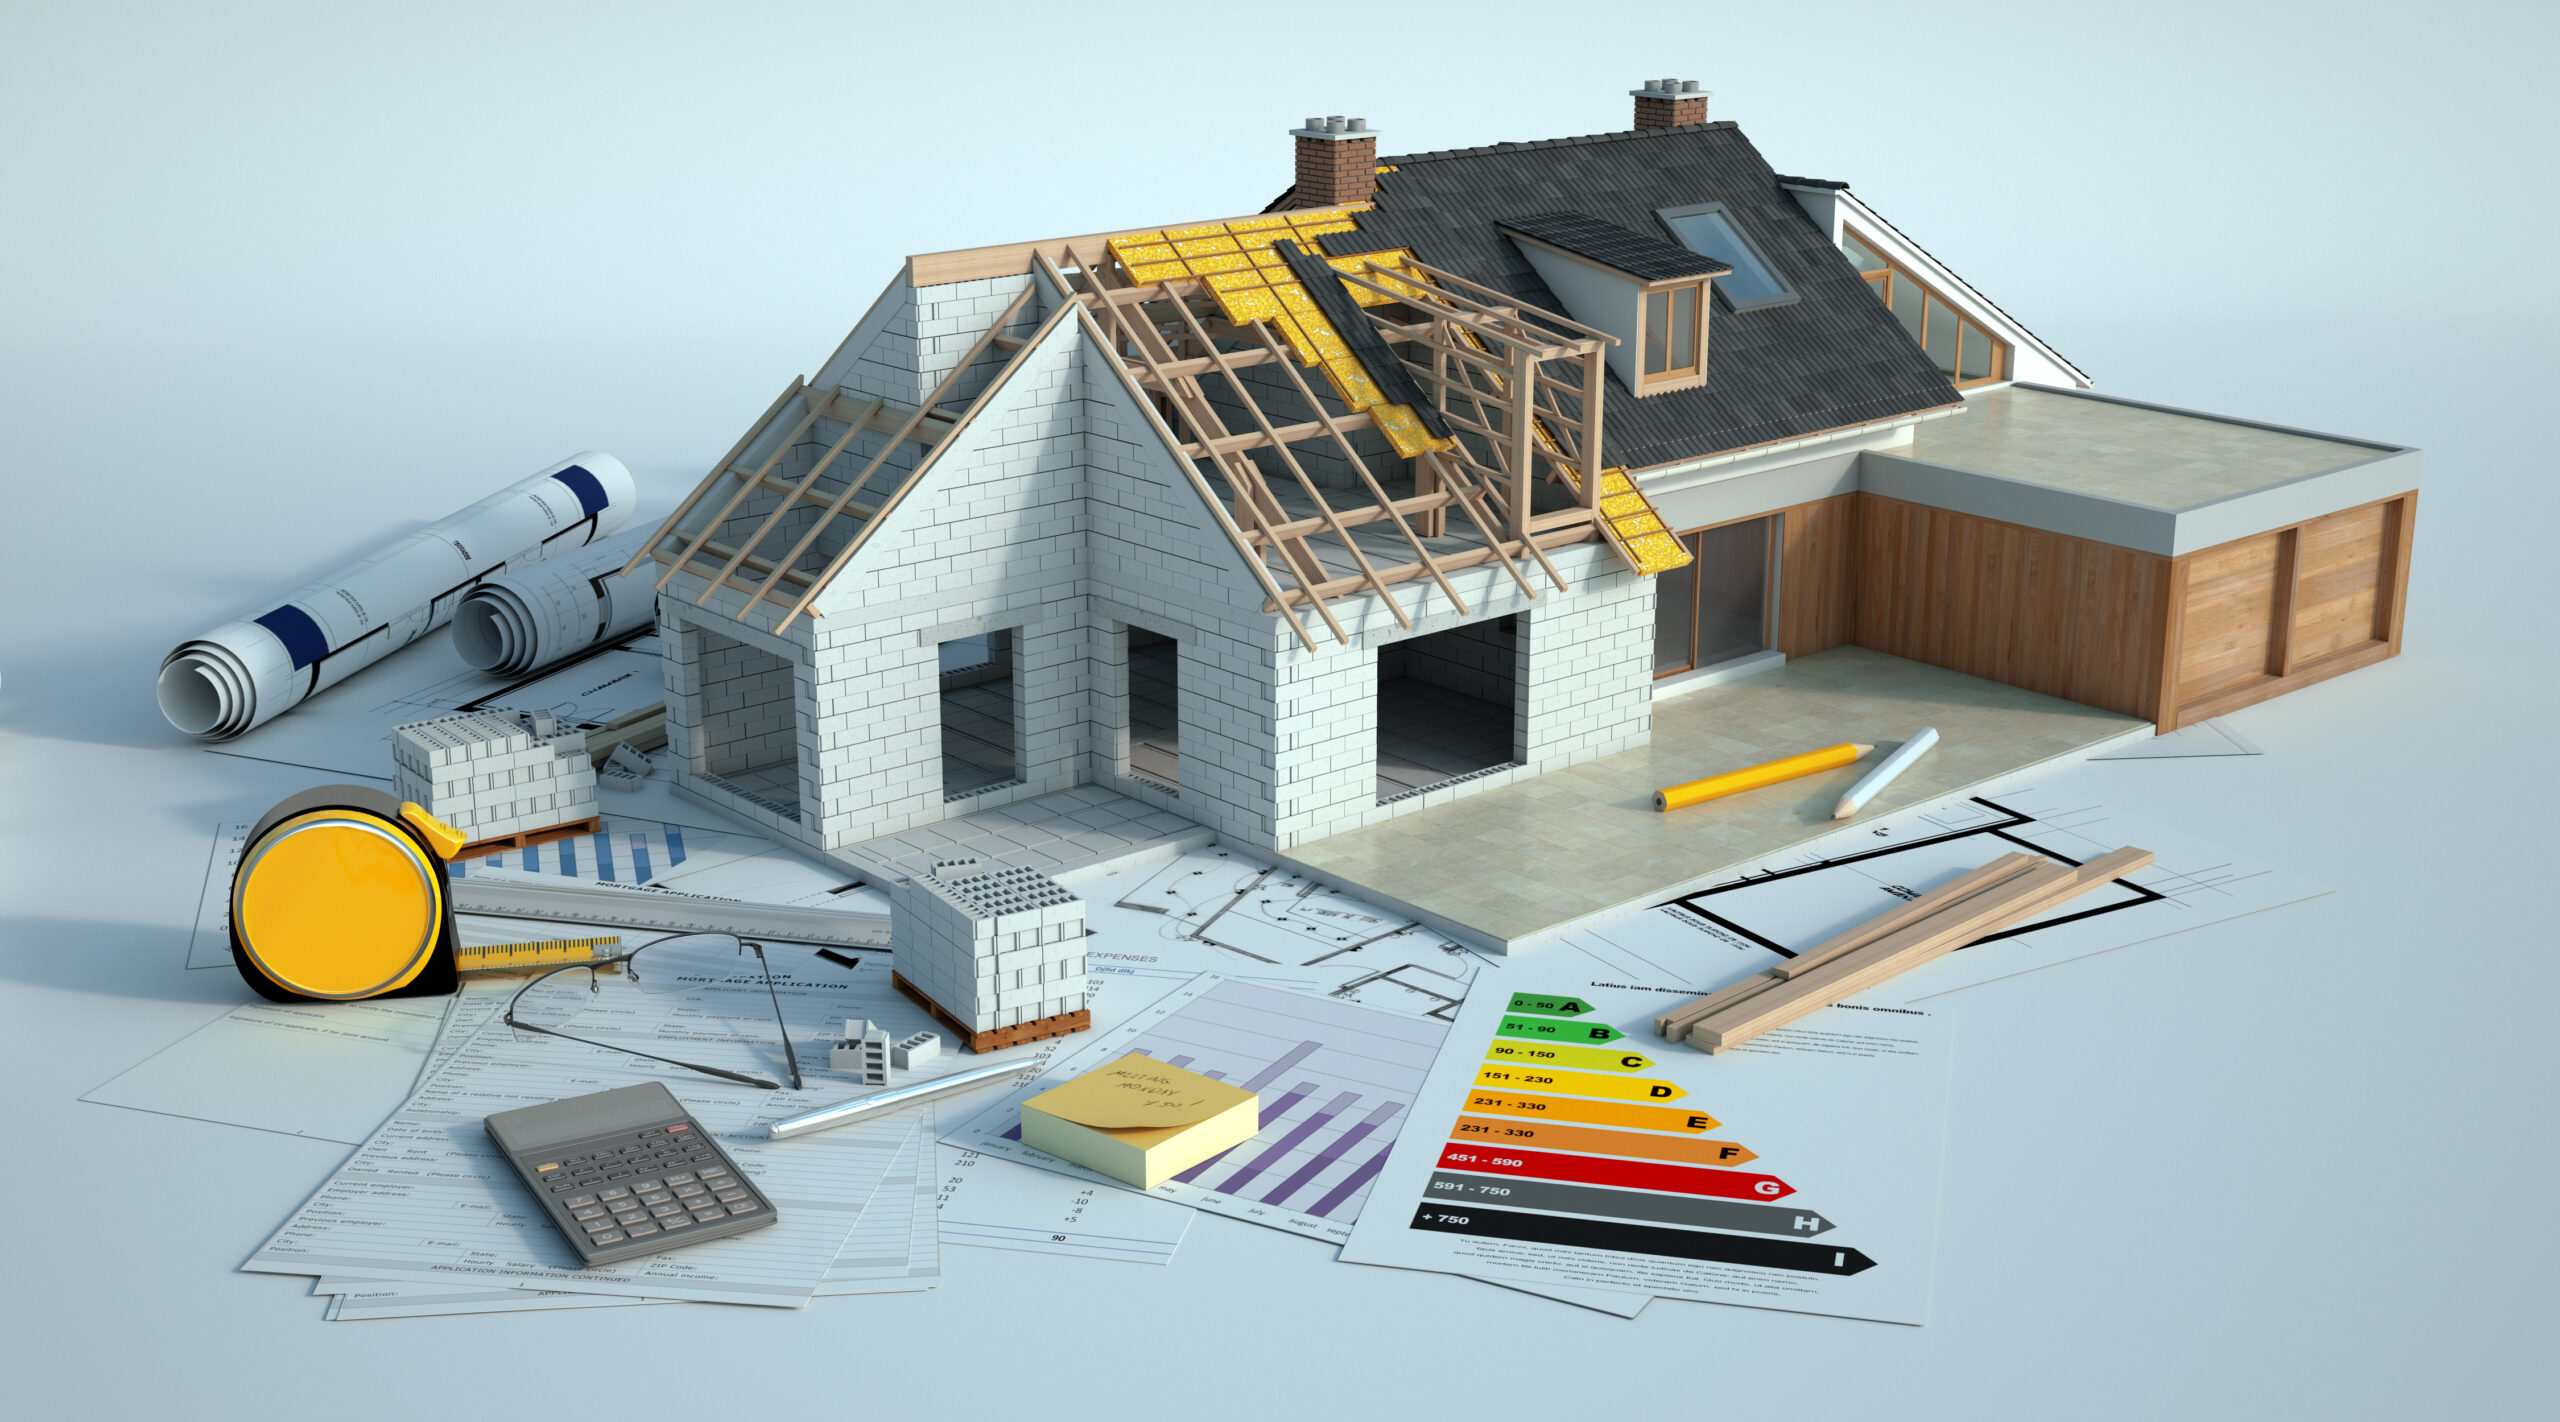 Home Renovation Time? How to Check your Contractor’s Work